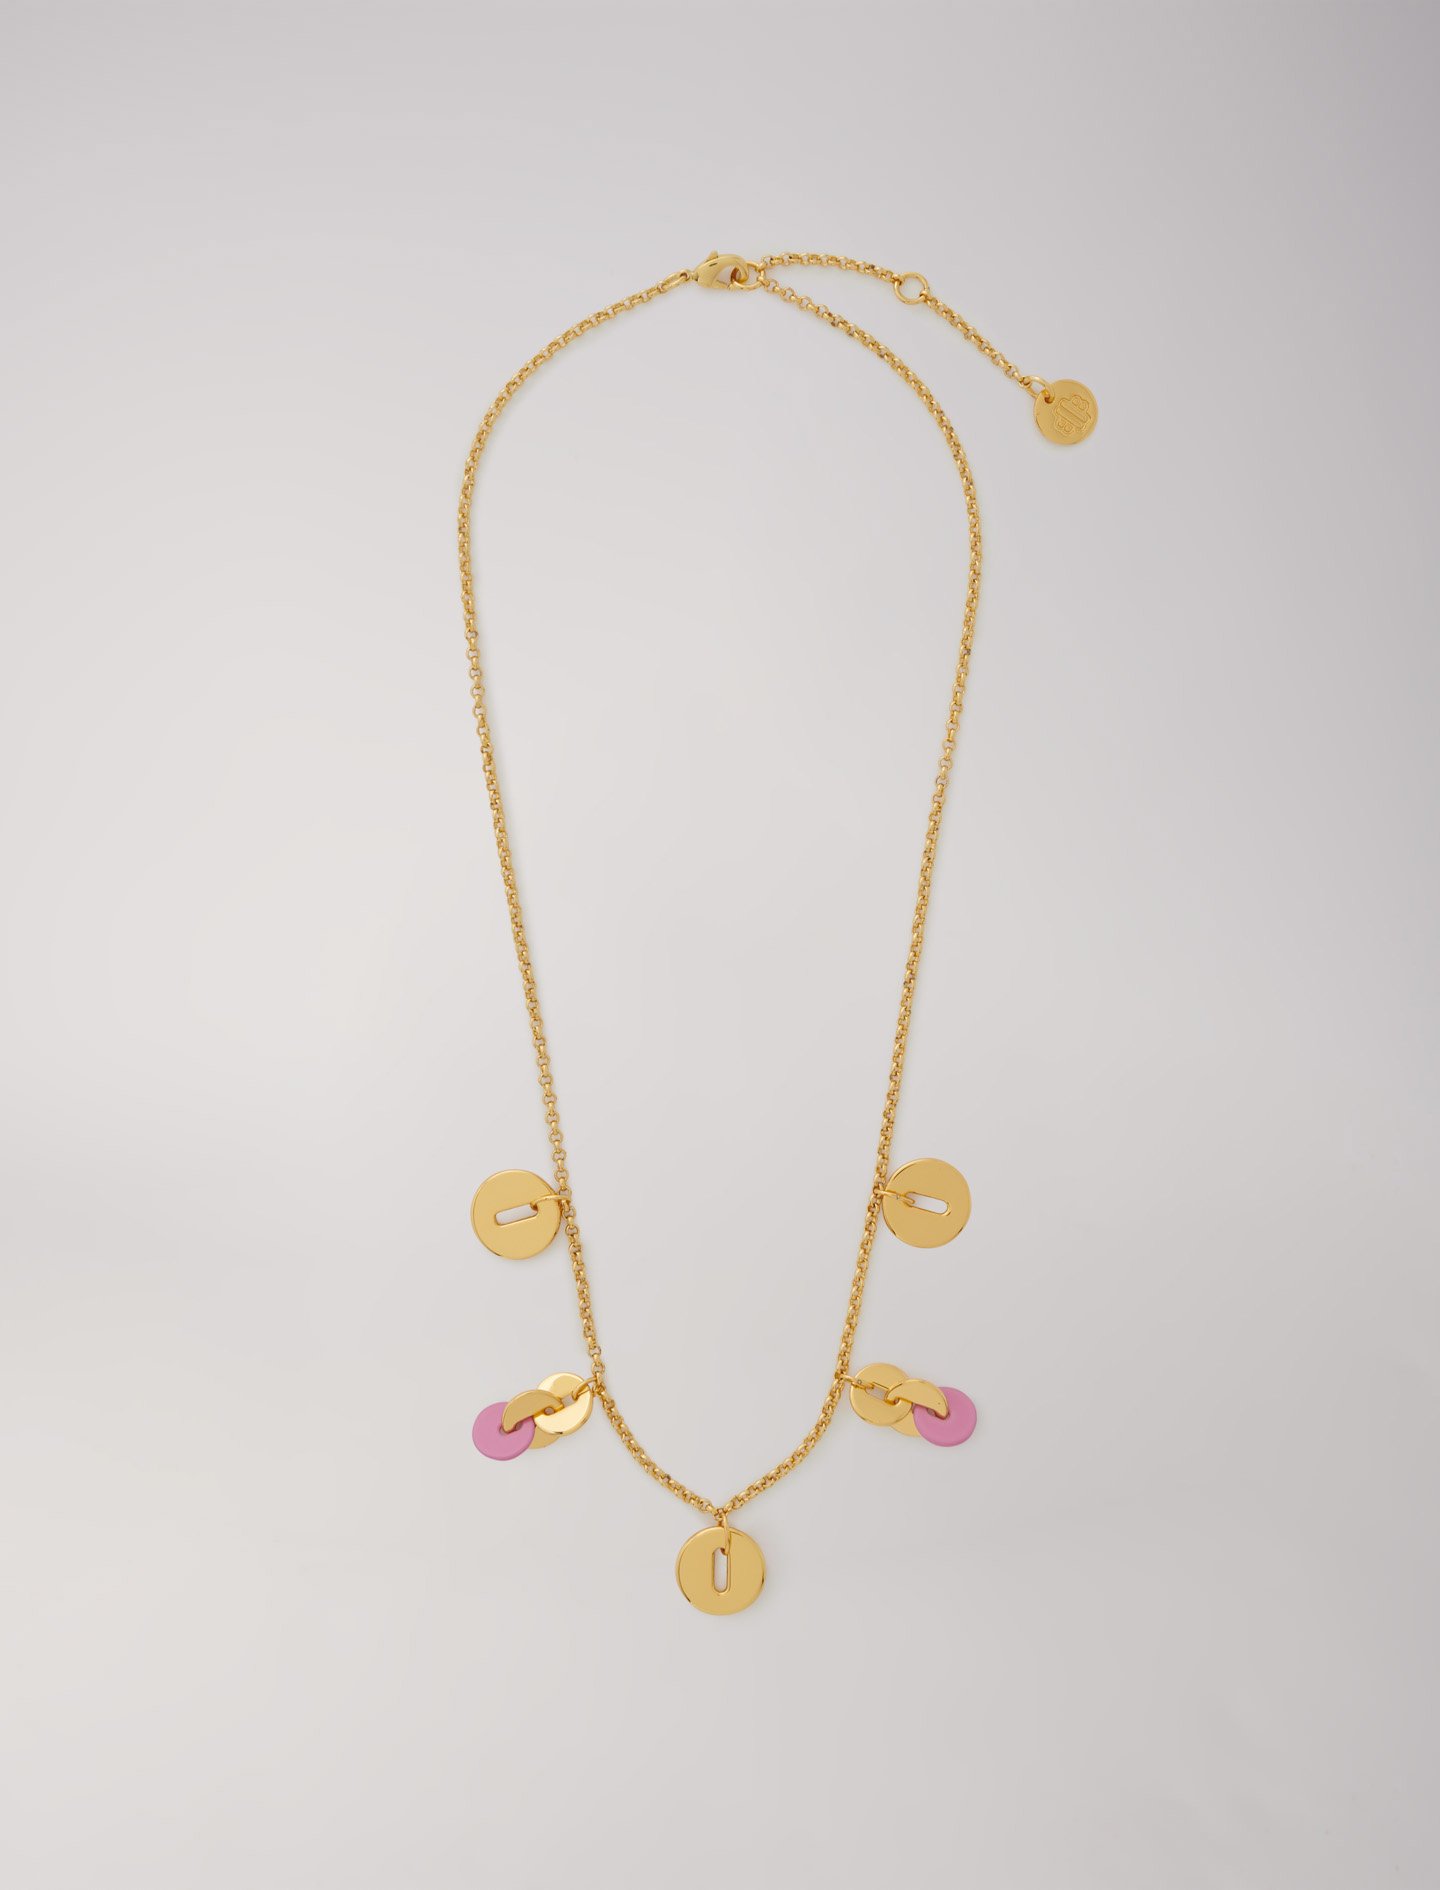 Mixte's resin Jewellery: Pendant chain necklace for Spring/Summer, size Mixte-Jewelry-OS (ONE SIZE), in color Gold / Yellow